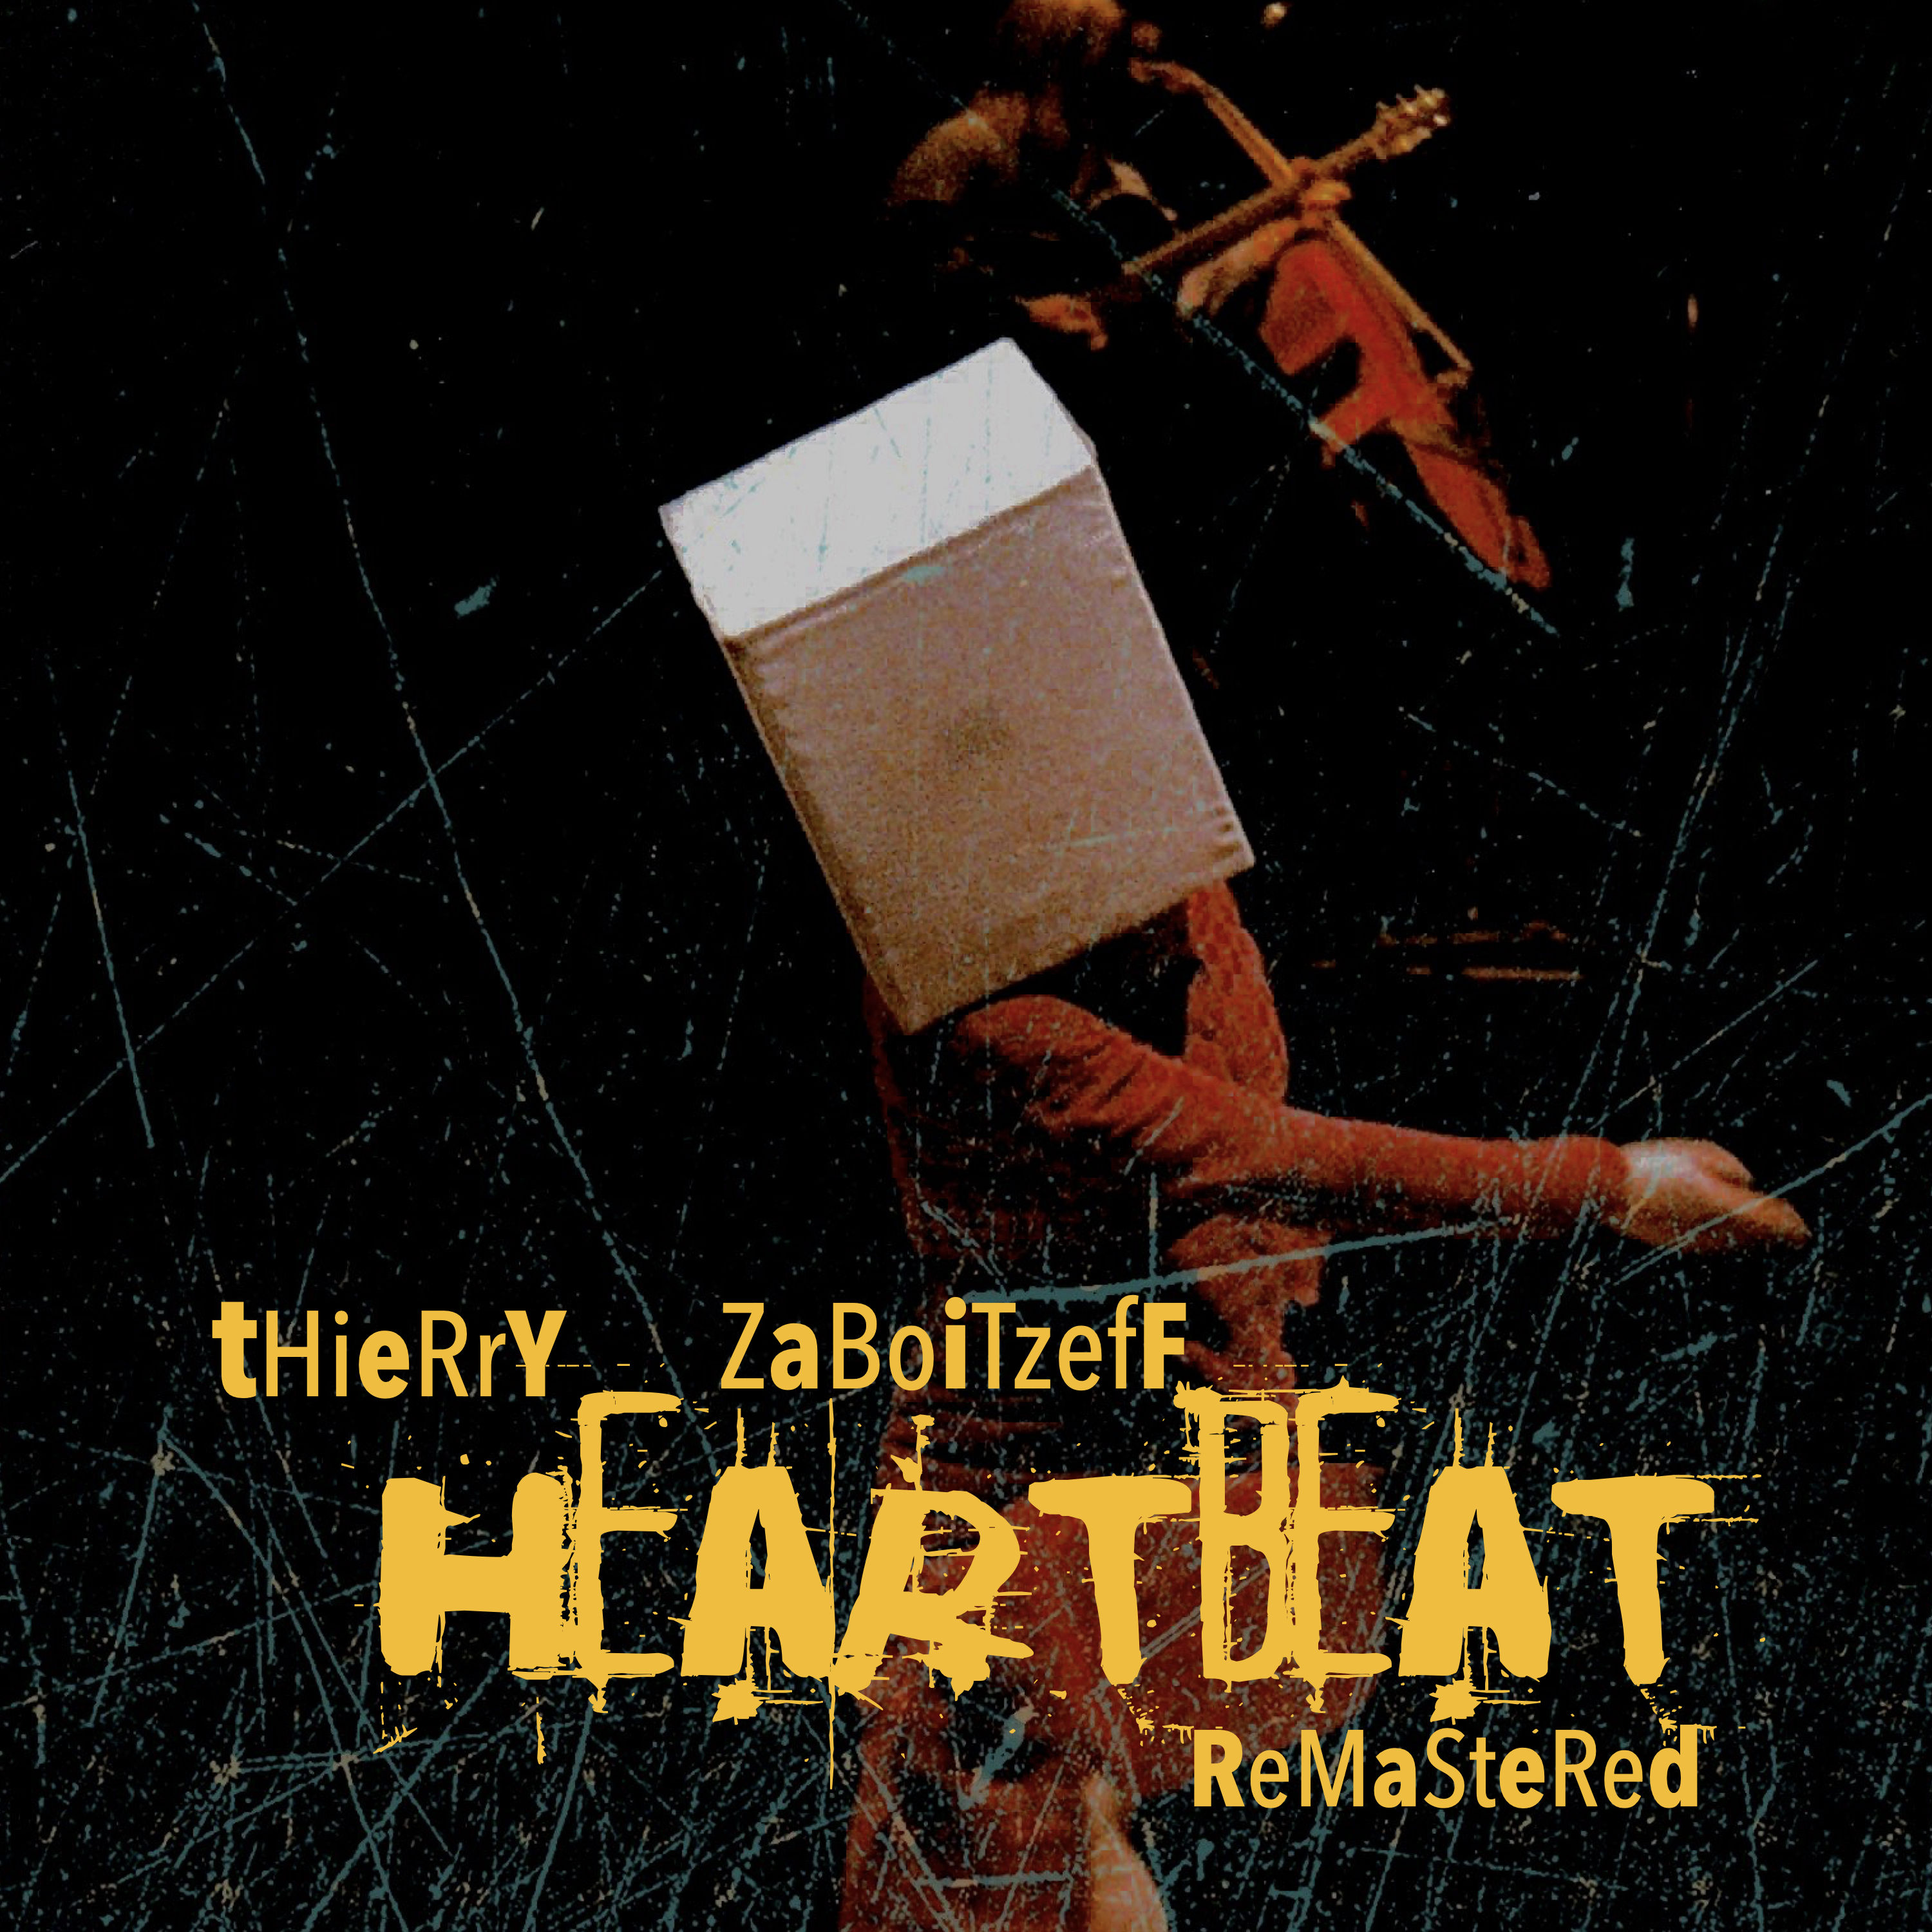 Heartbeat - remastered